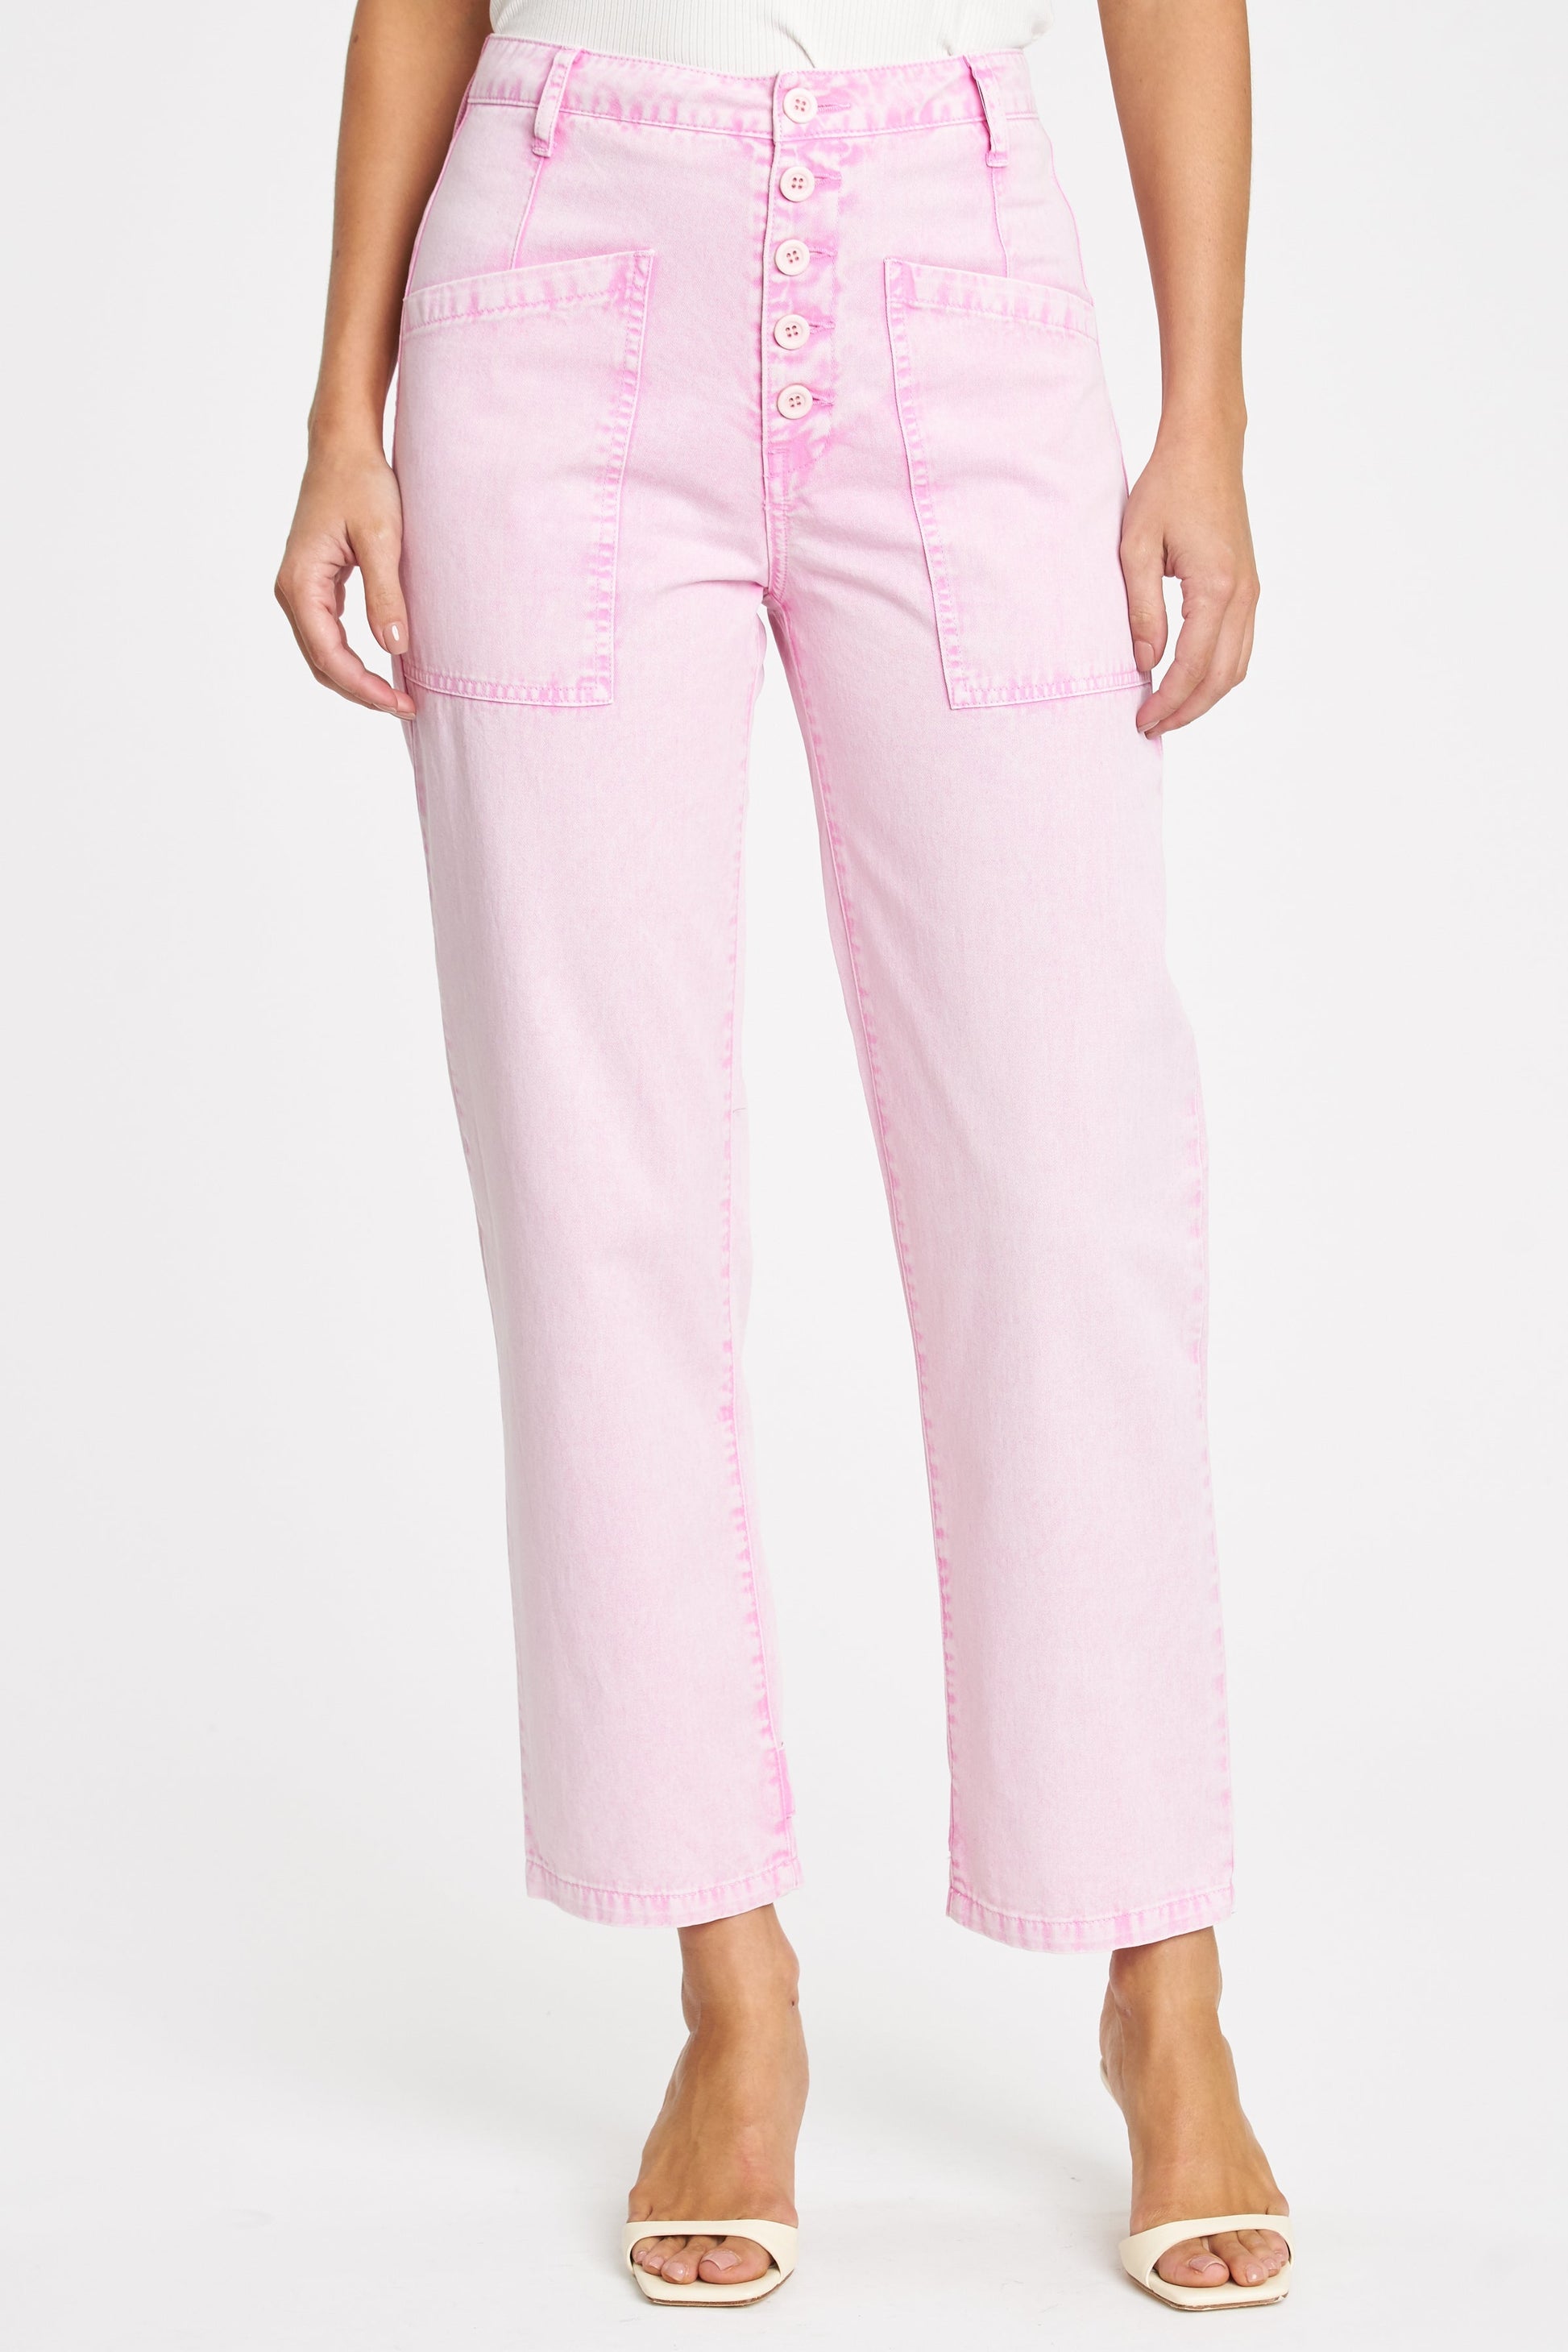 TAMMY HIGH RISE TROUSERS PANT PISTOLA PINK 28 